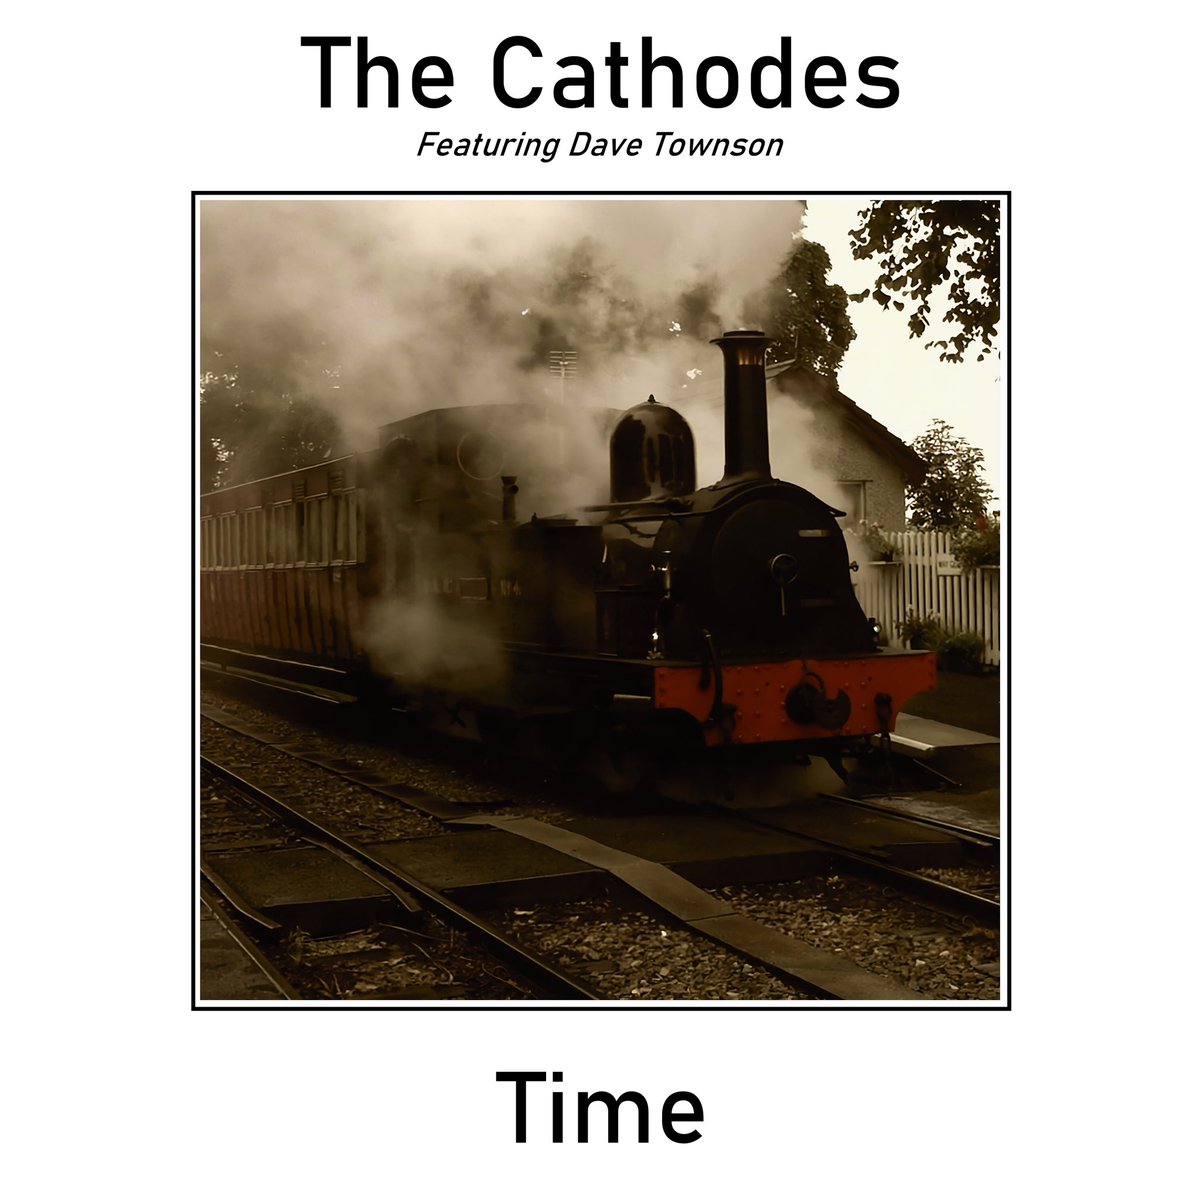 There’s still TIME to vote in the Heritage Chart! Just go to heritagechart.co.uk and select the Vote Now button. Select “Time” by The Cathodes (at number 6) and remember to click the submit button.